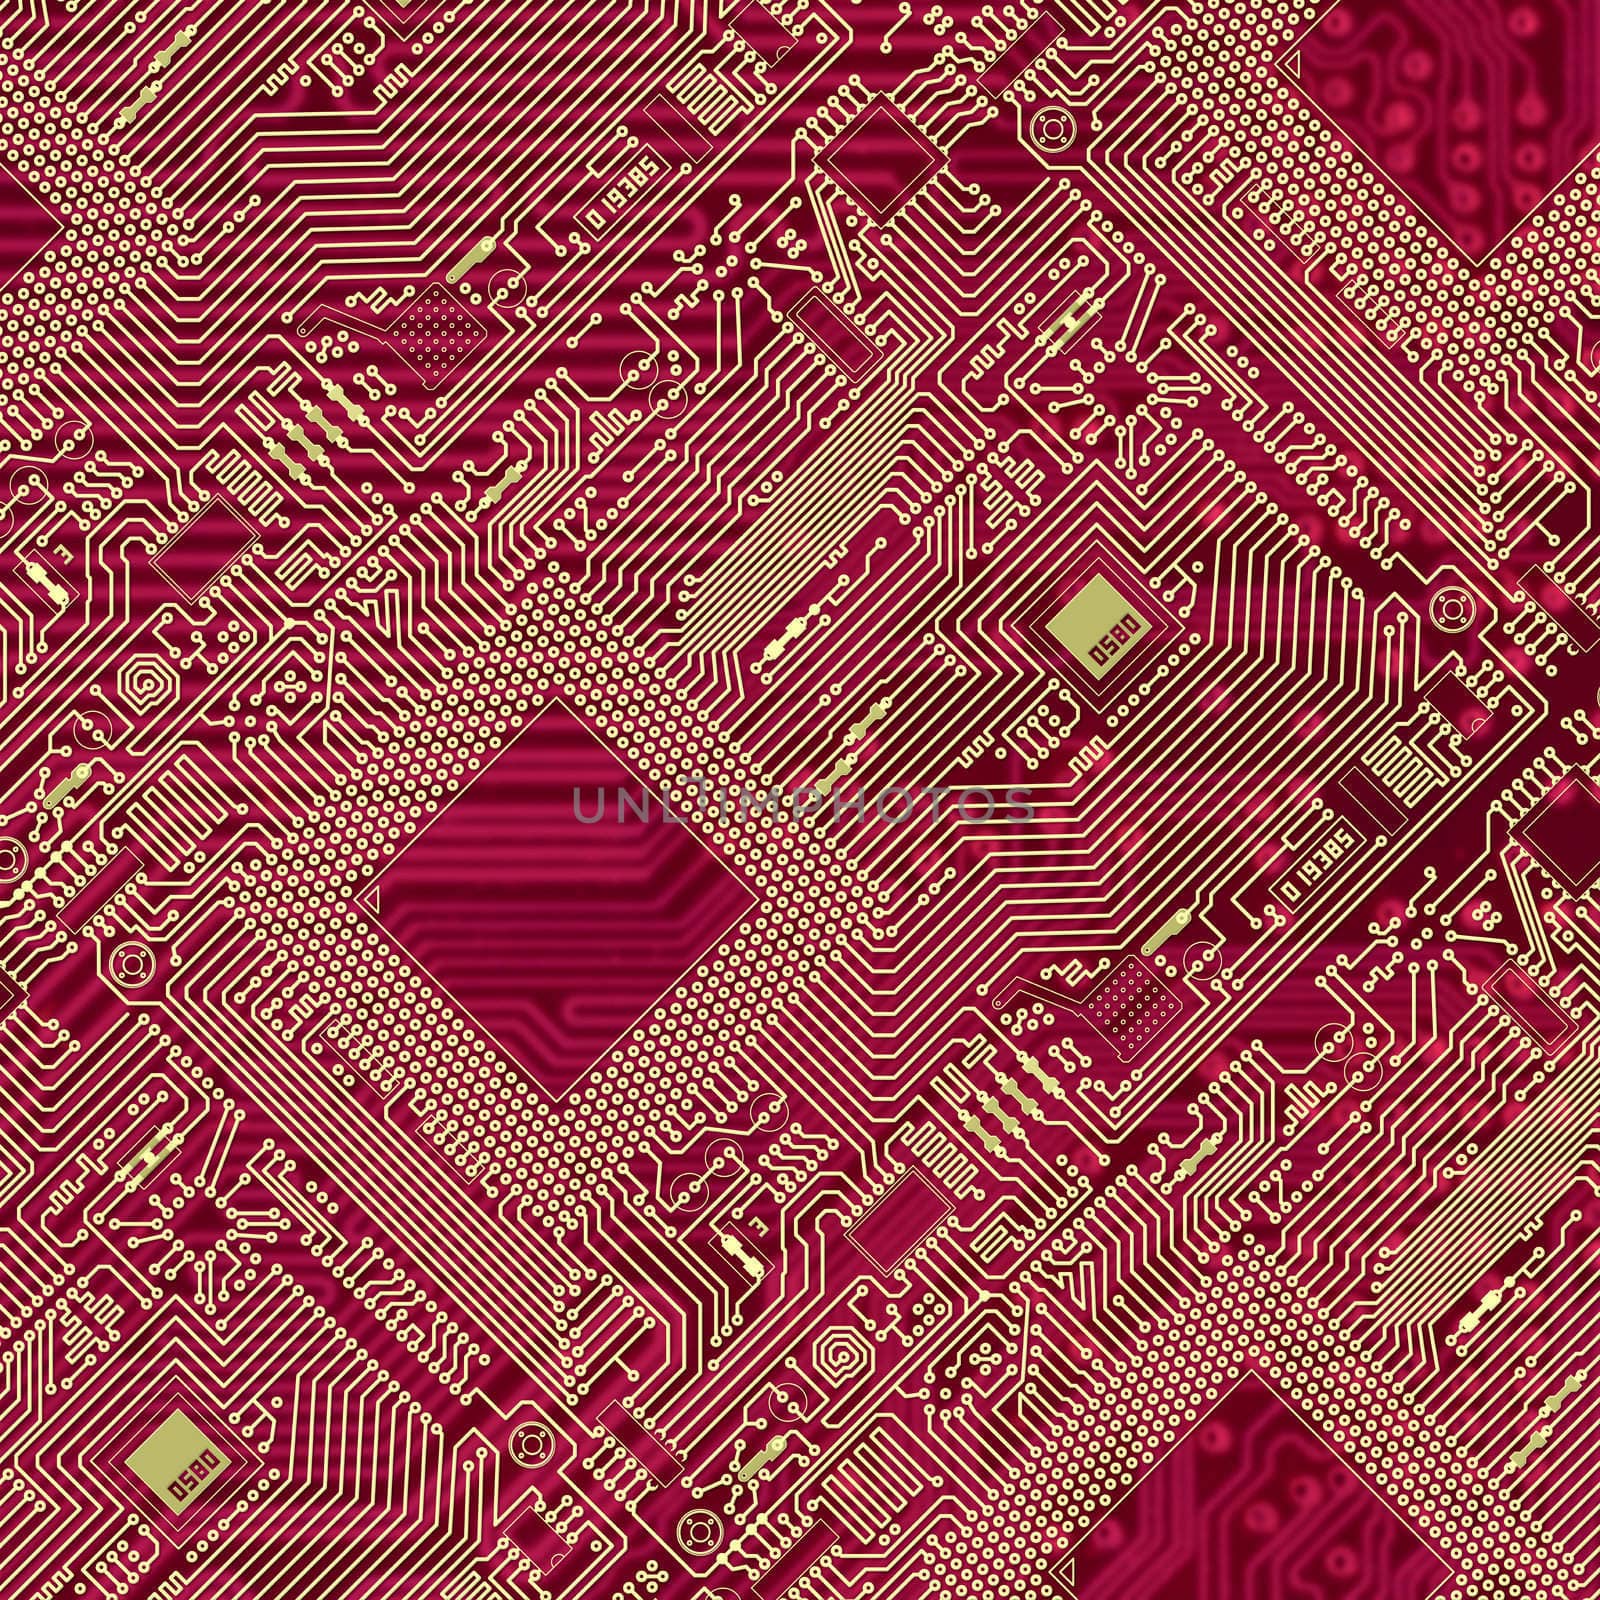 Printed red industrial circuit board pattern by pzaxe